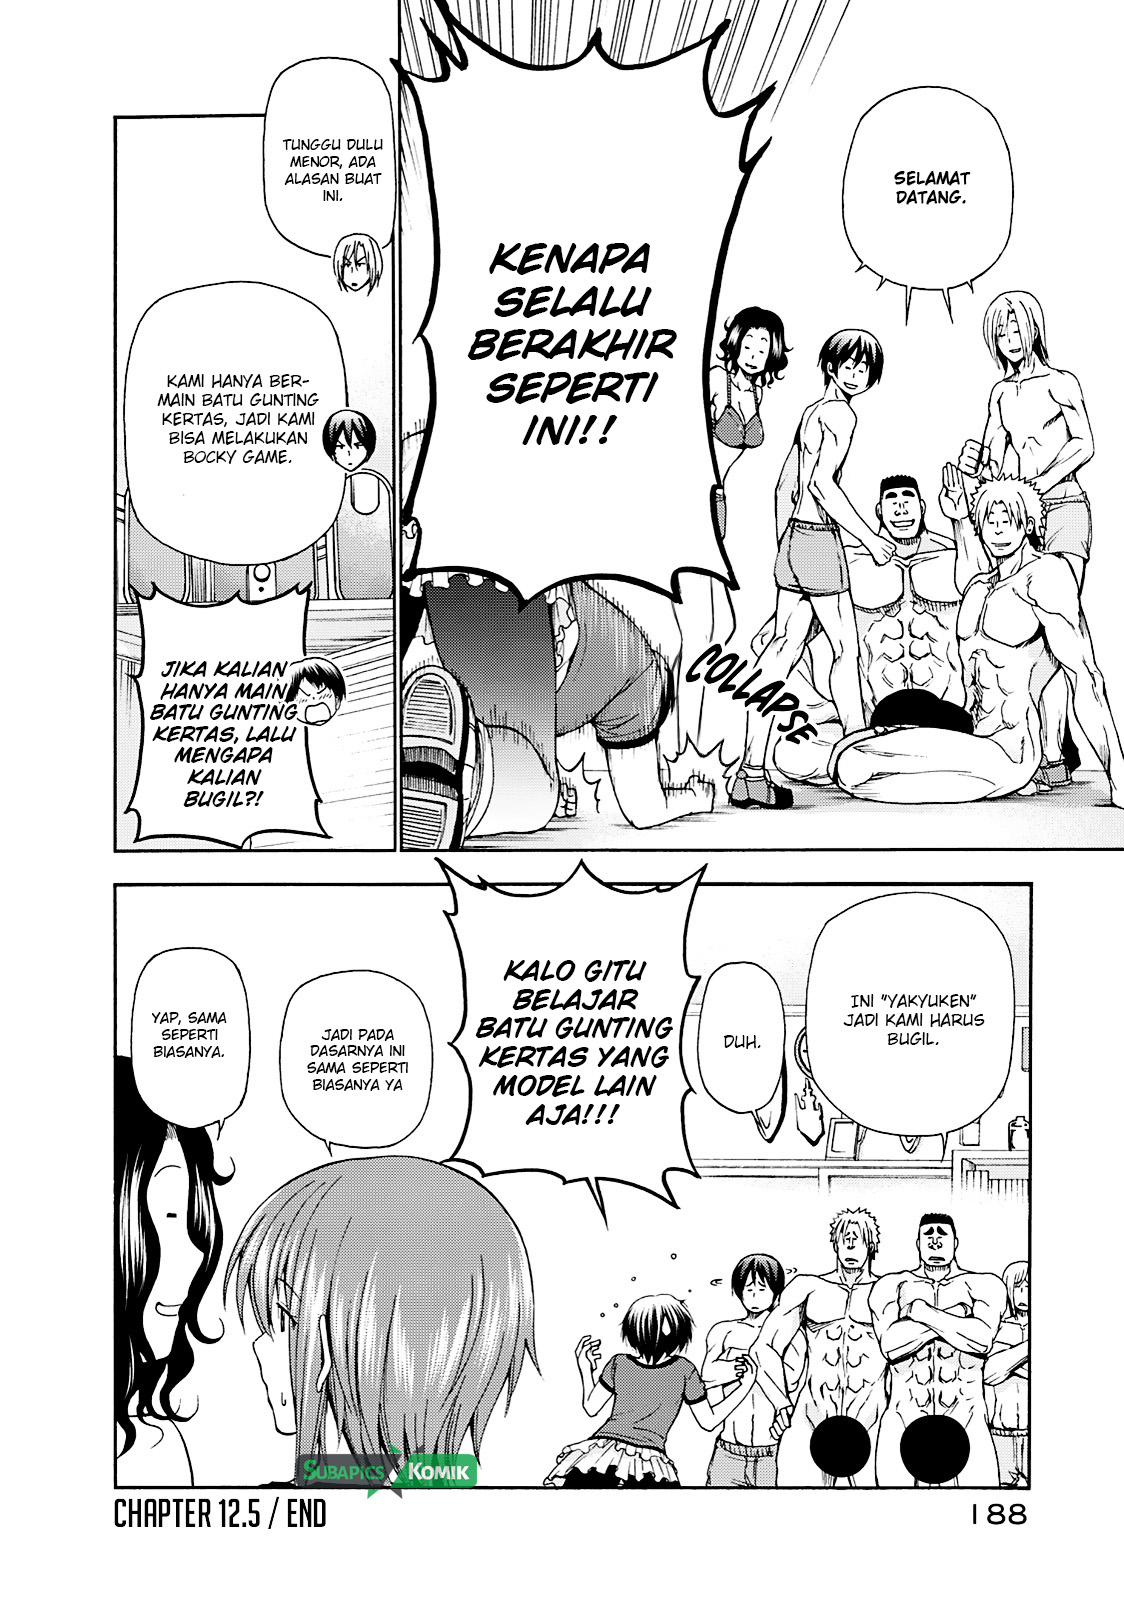 Grand Blue Chapter 12-5